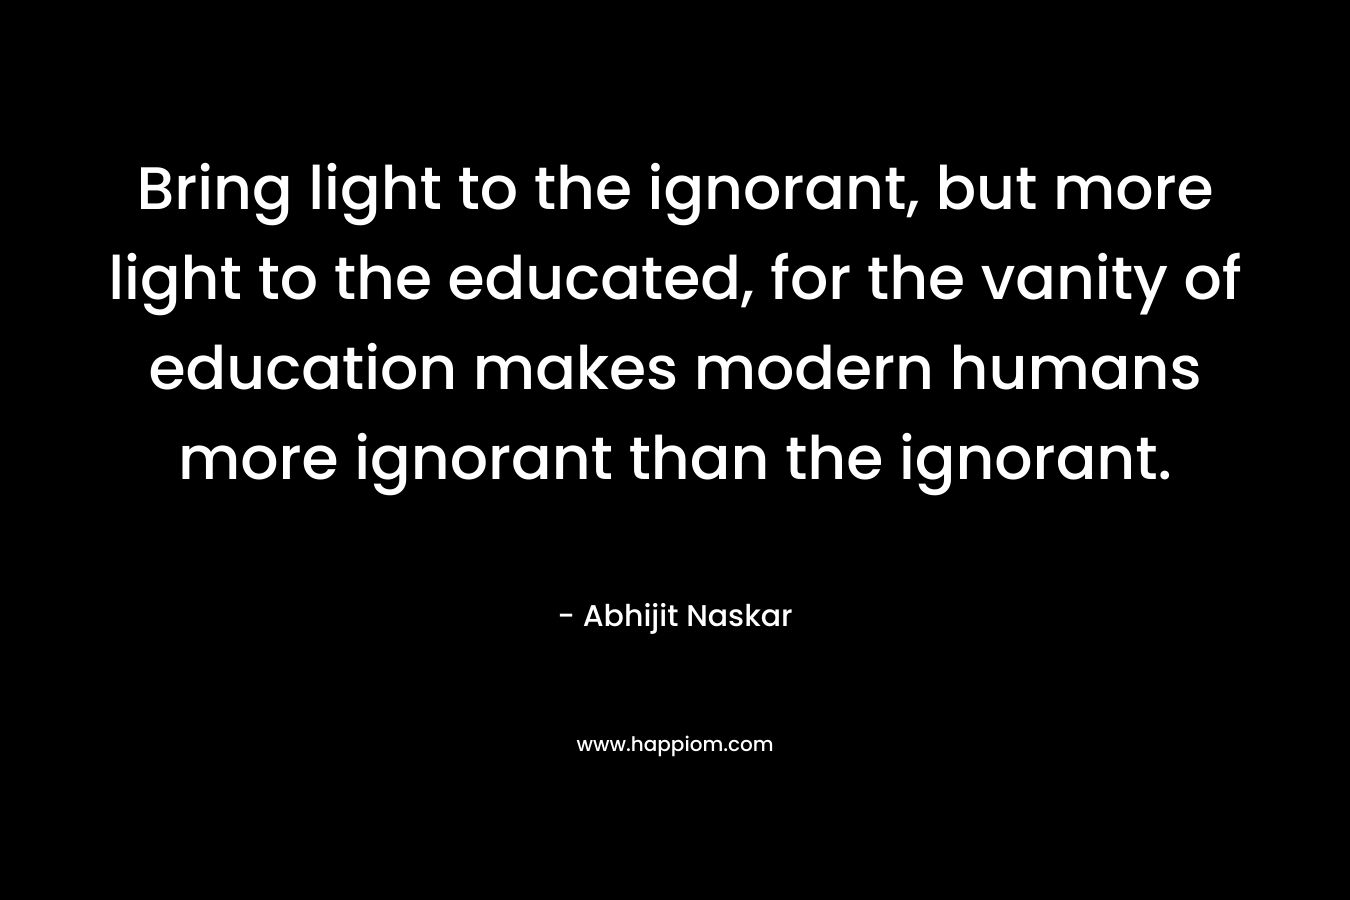 Bring light to the ignorant, but more light to the educated, for the vanity of education makes modern humans more ignorant than the ignorant.